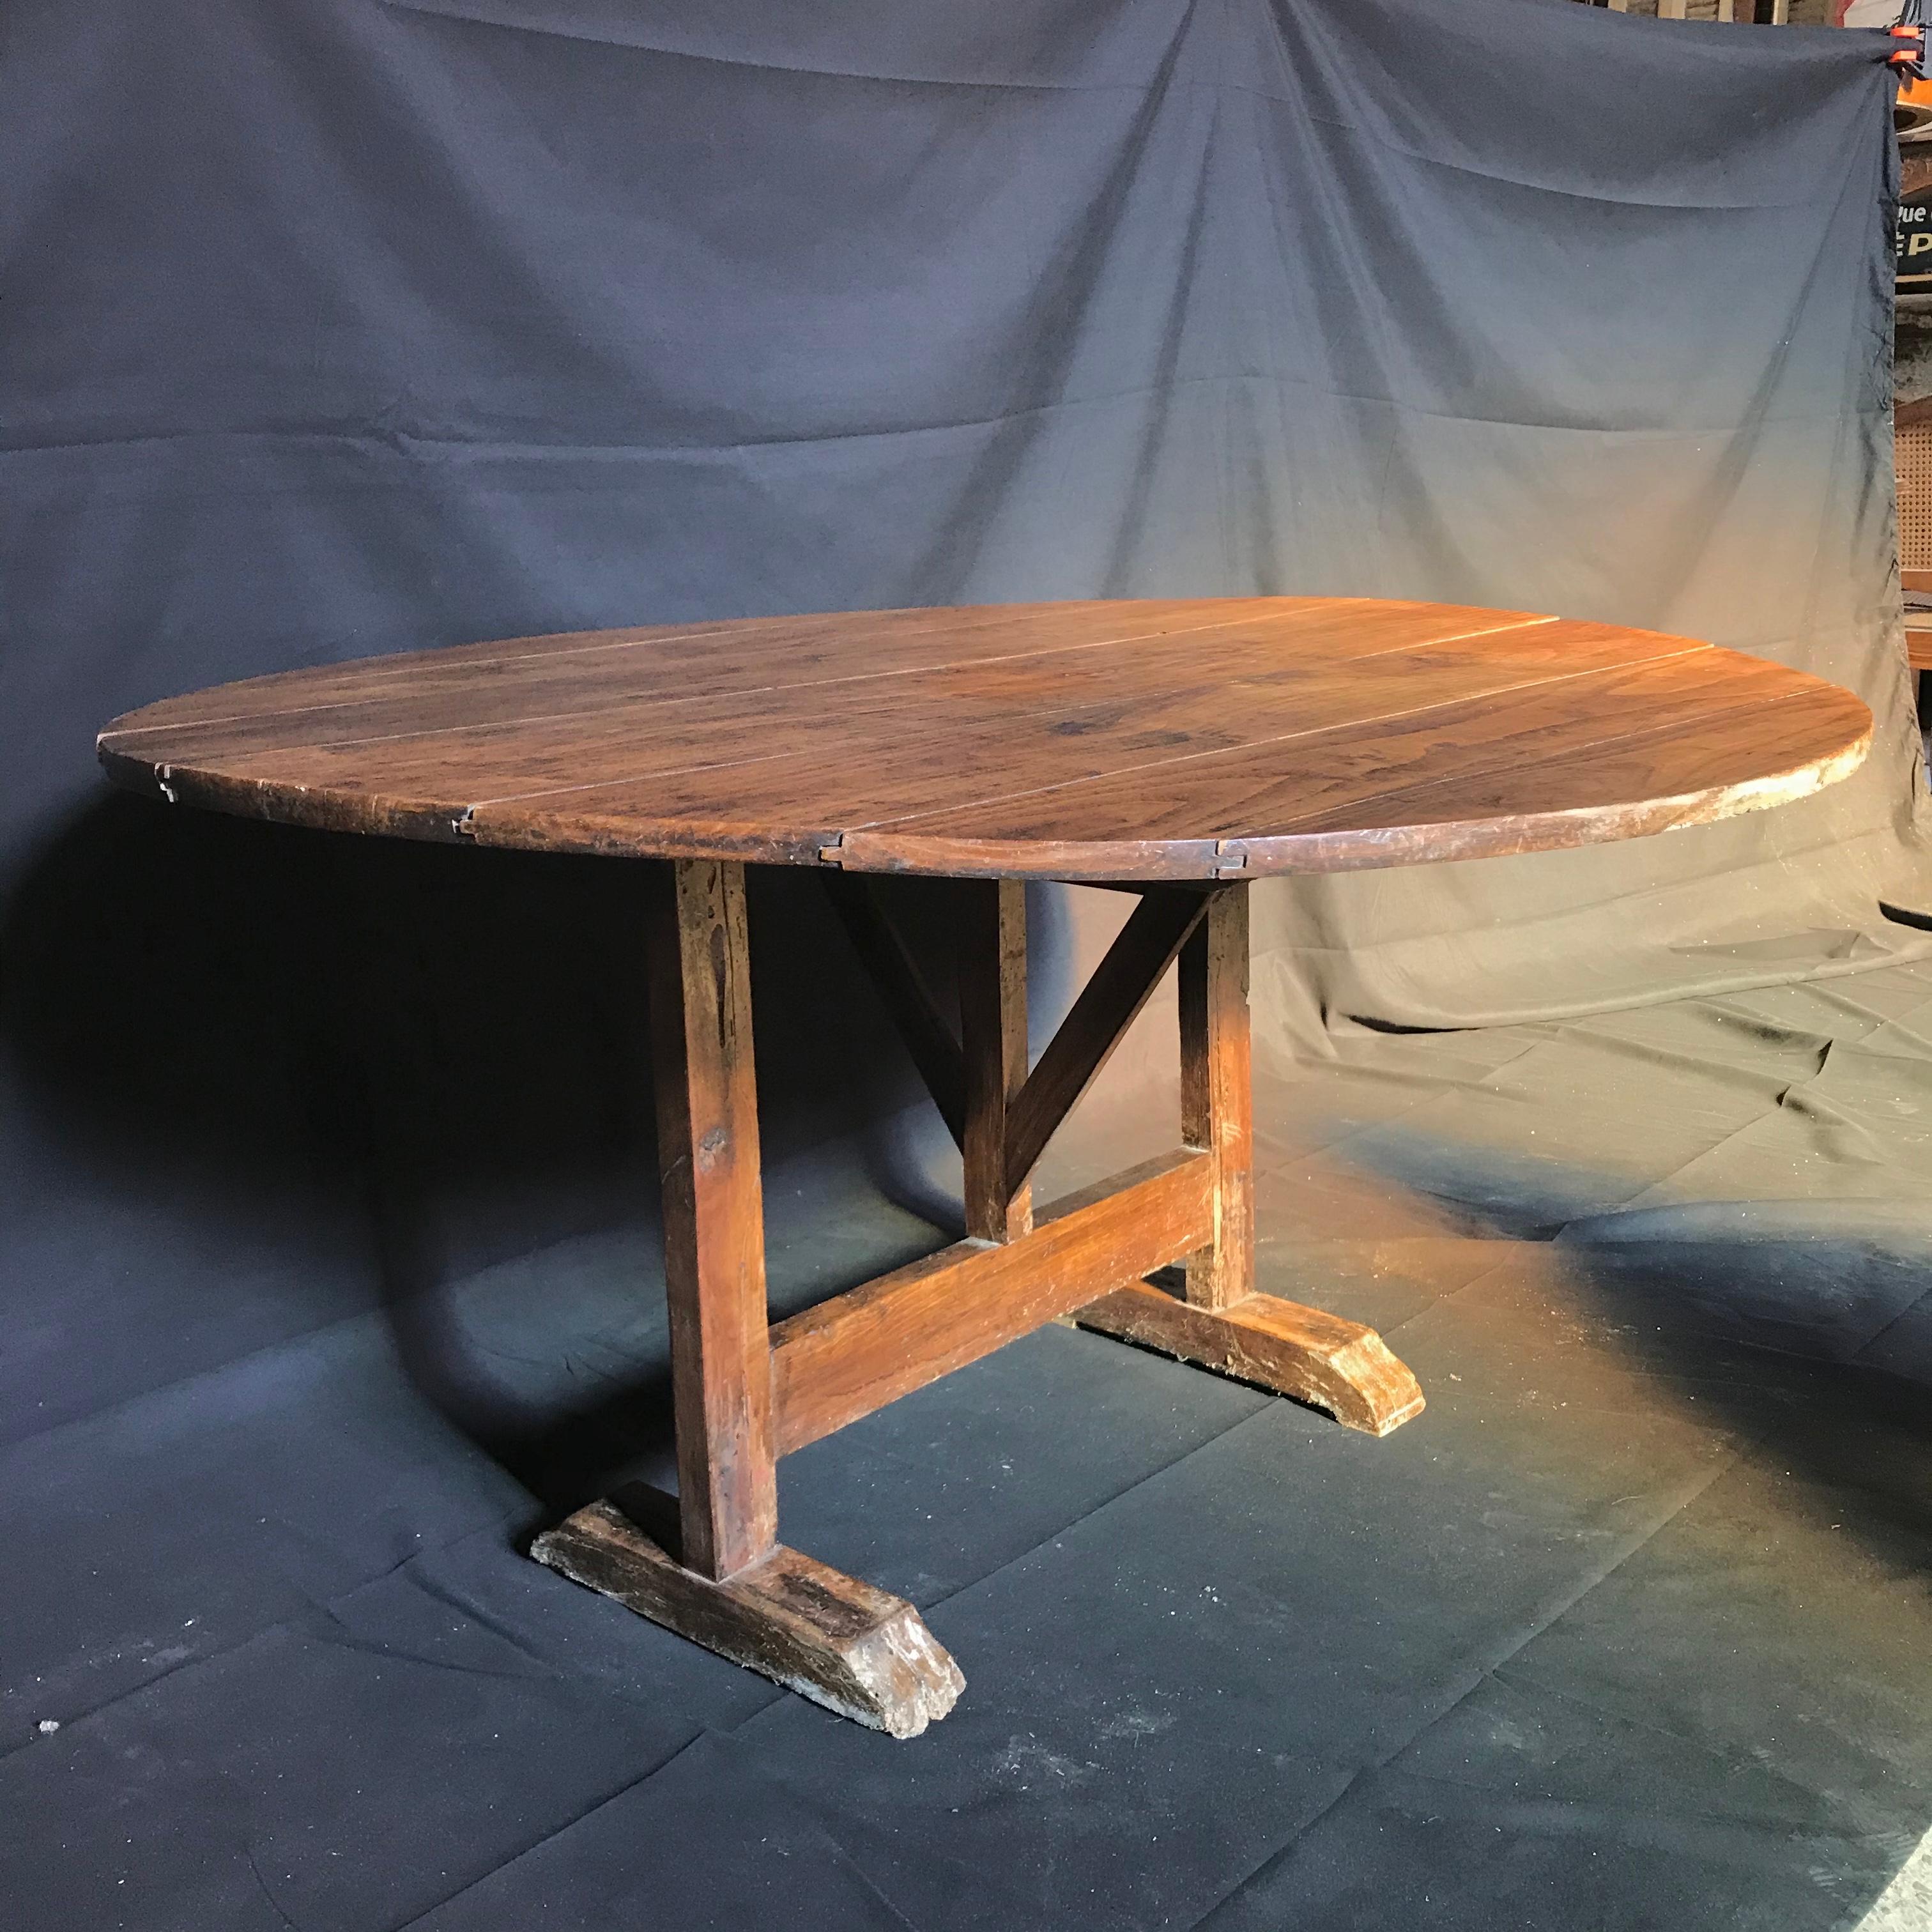 French wine tasting table, also known as a vendage or vigeron table, which was once used in the vineyards of France for tasting wine or enjoying a meal. This table would be suitable for use in a breakfast area or wine cellar. Featuring a tilt top,